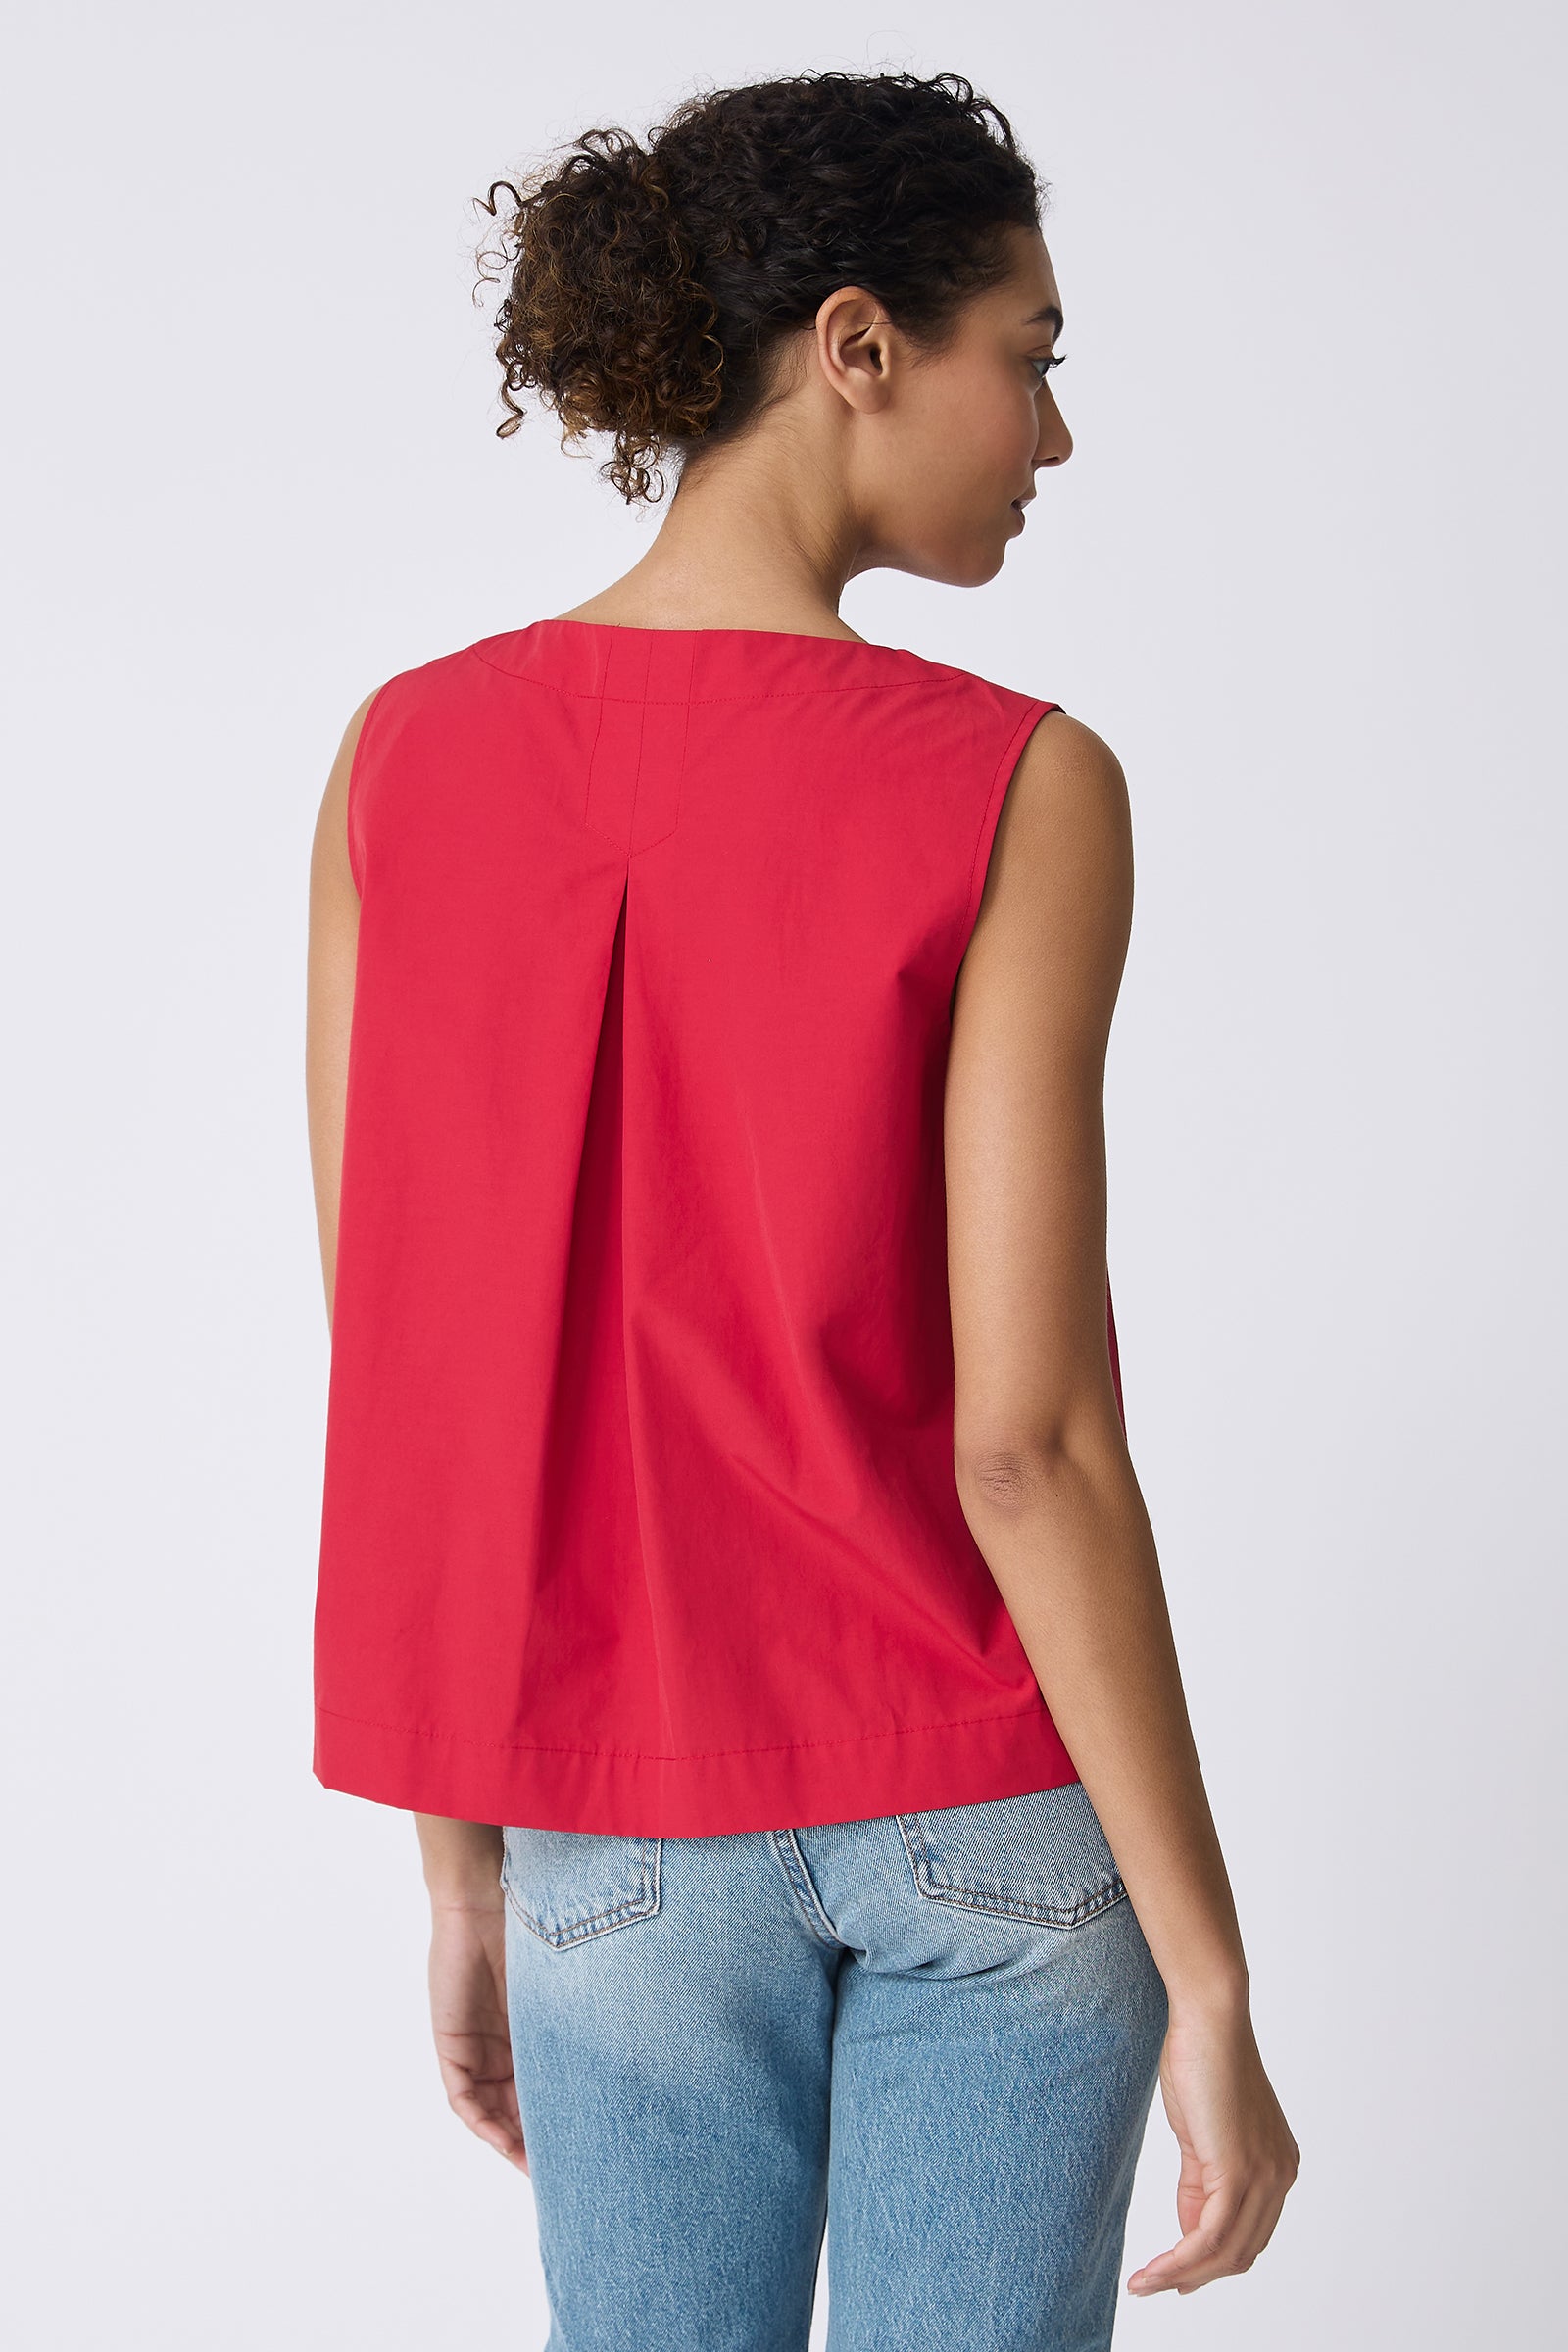 Kal Rieman Colette Shell Top in Red on model with arm behind back front view